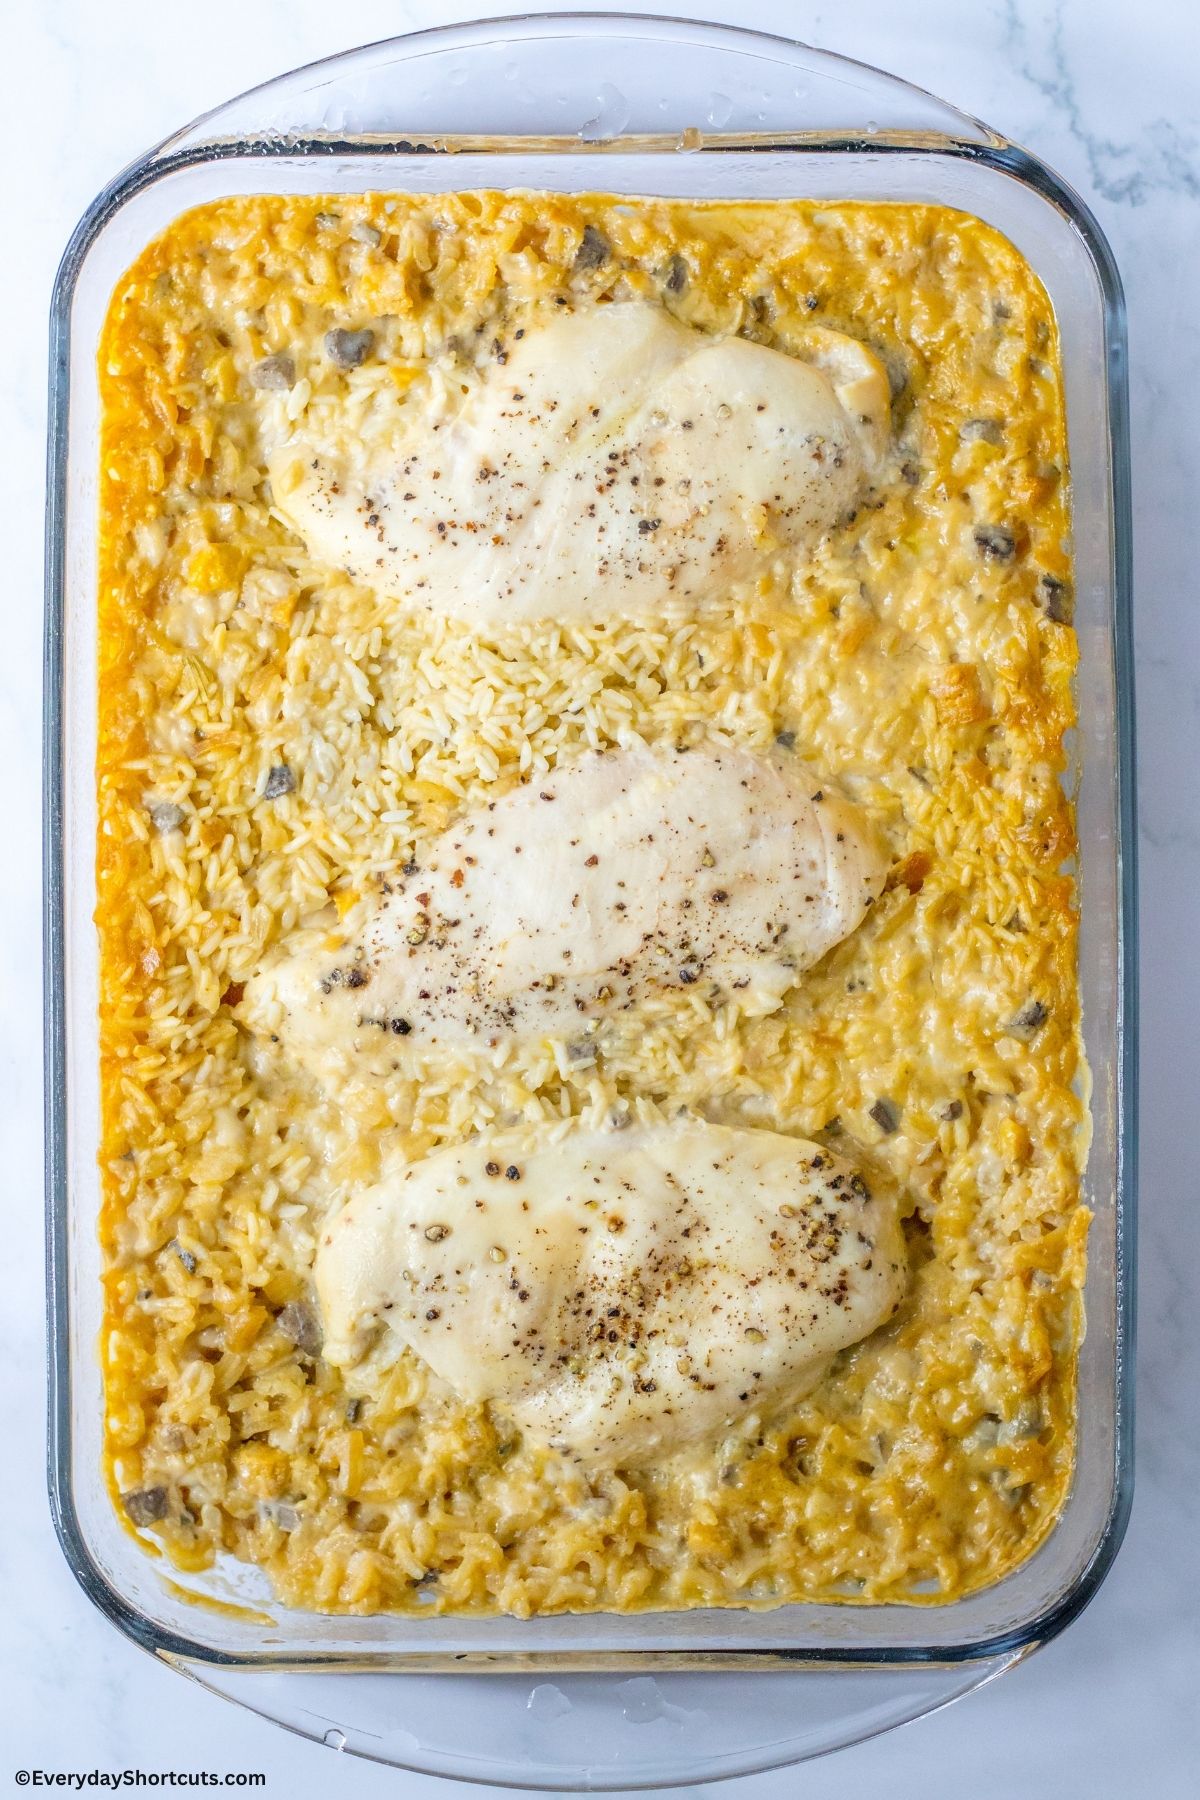 baked chicken and rice in a casserole dish